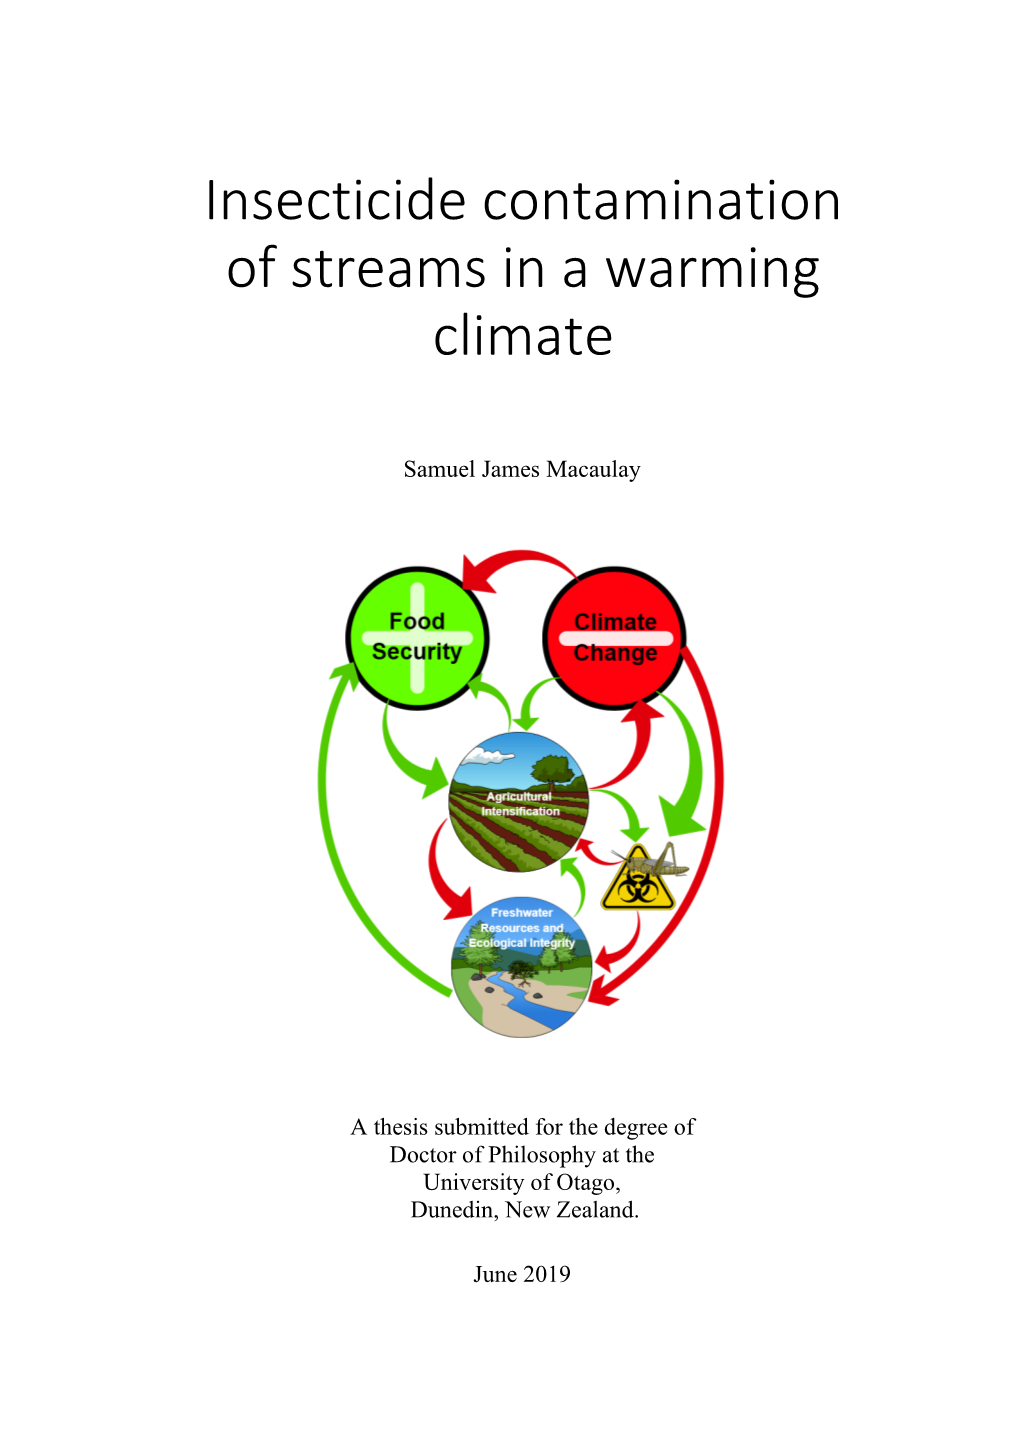 Insecticide Contamination of Streams in a Warming Climate